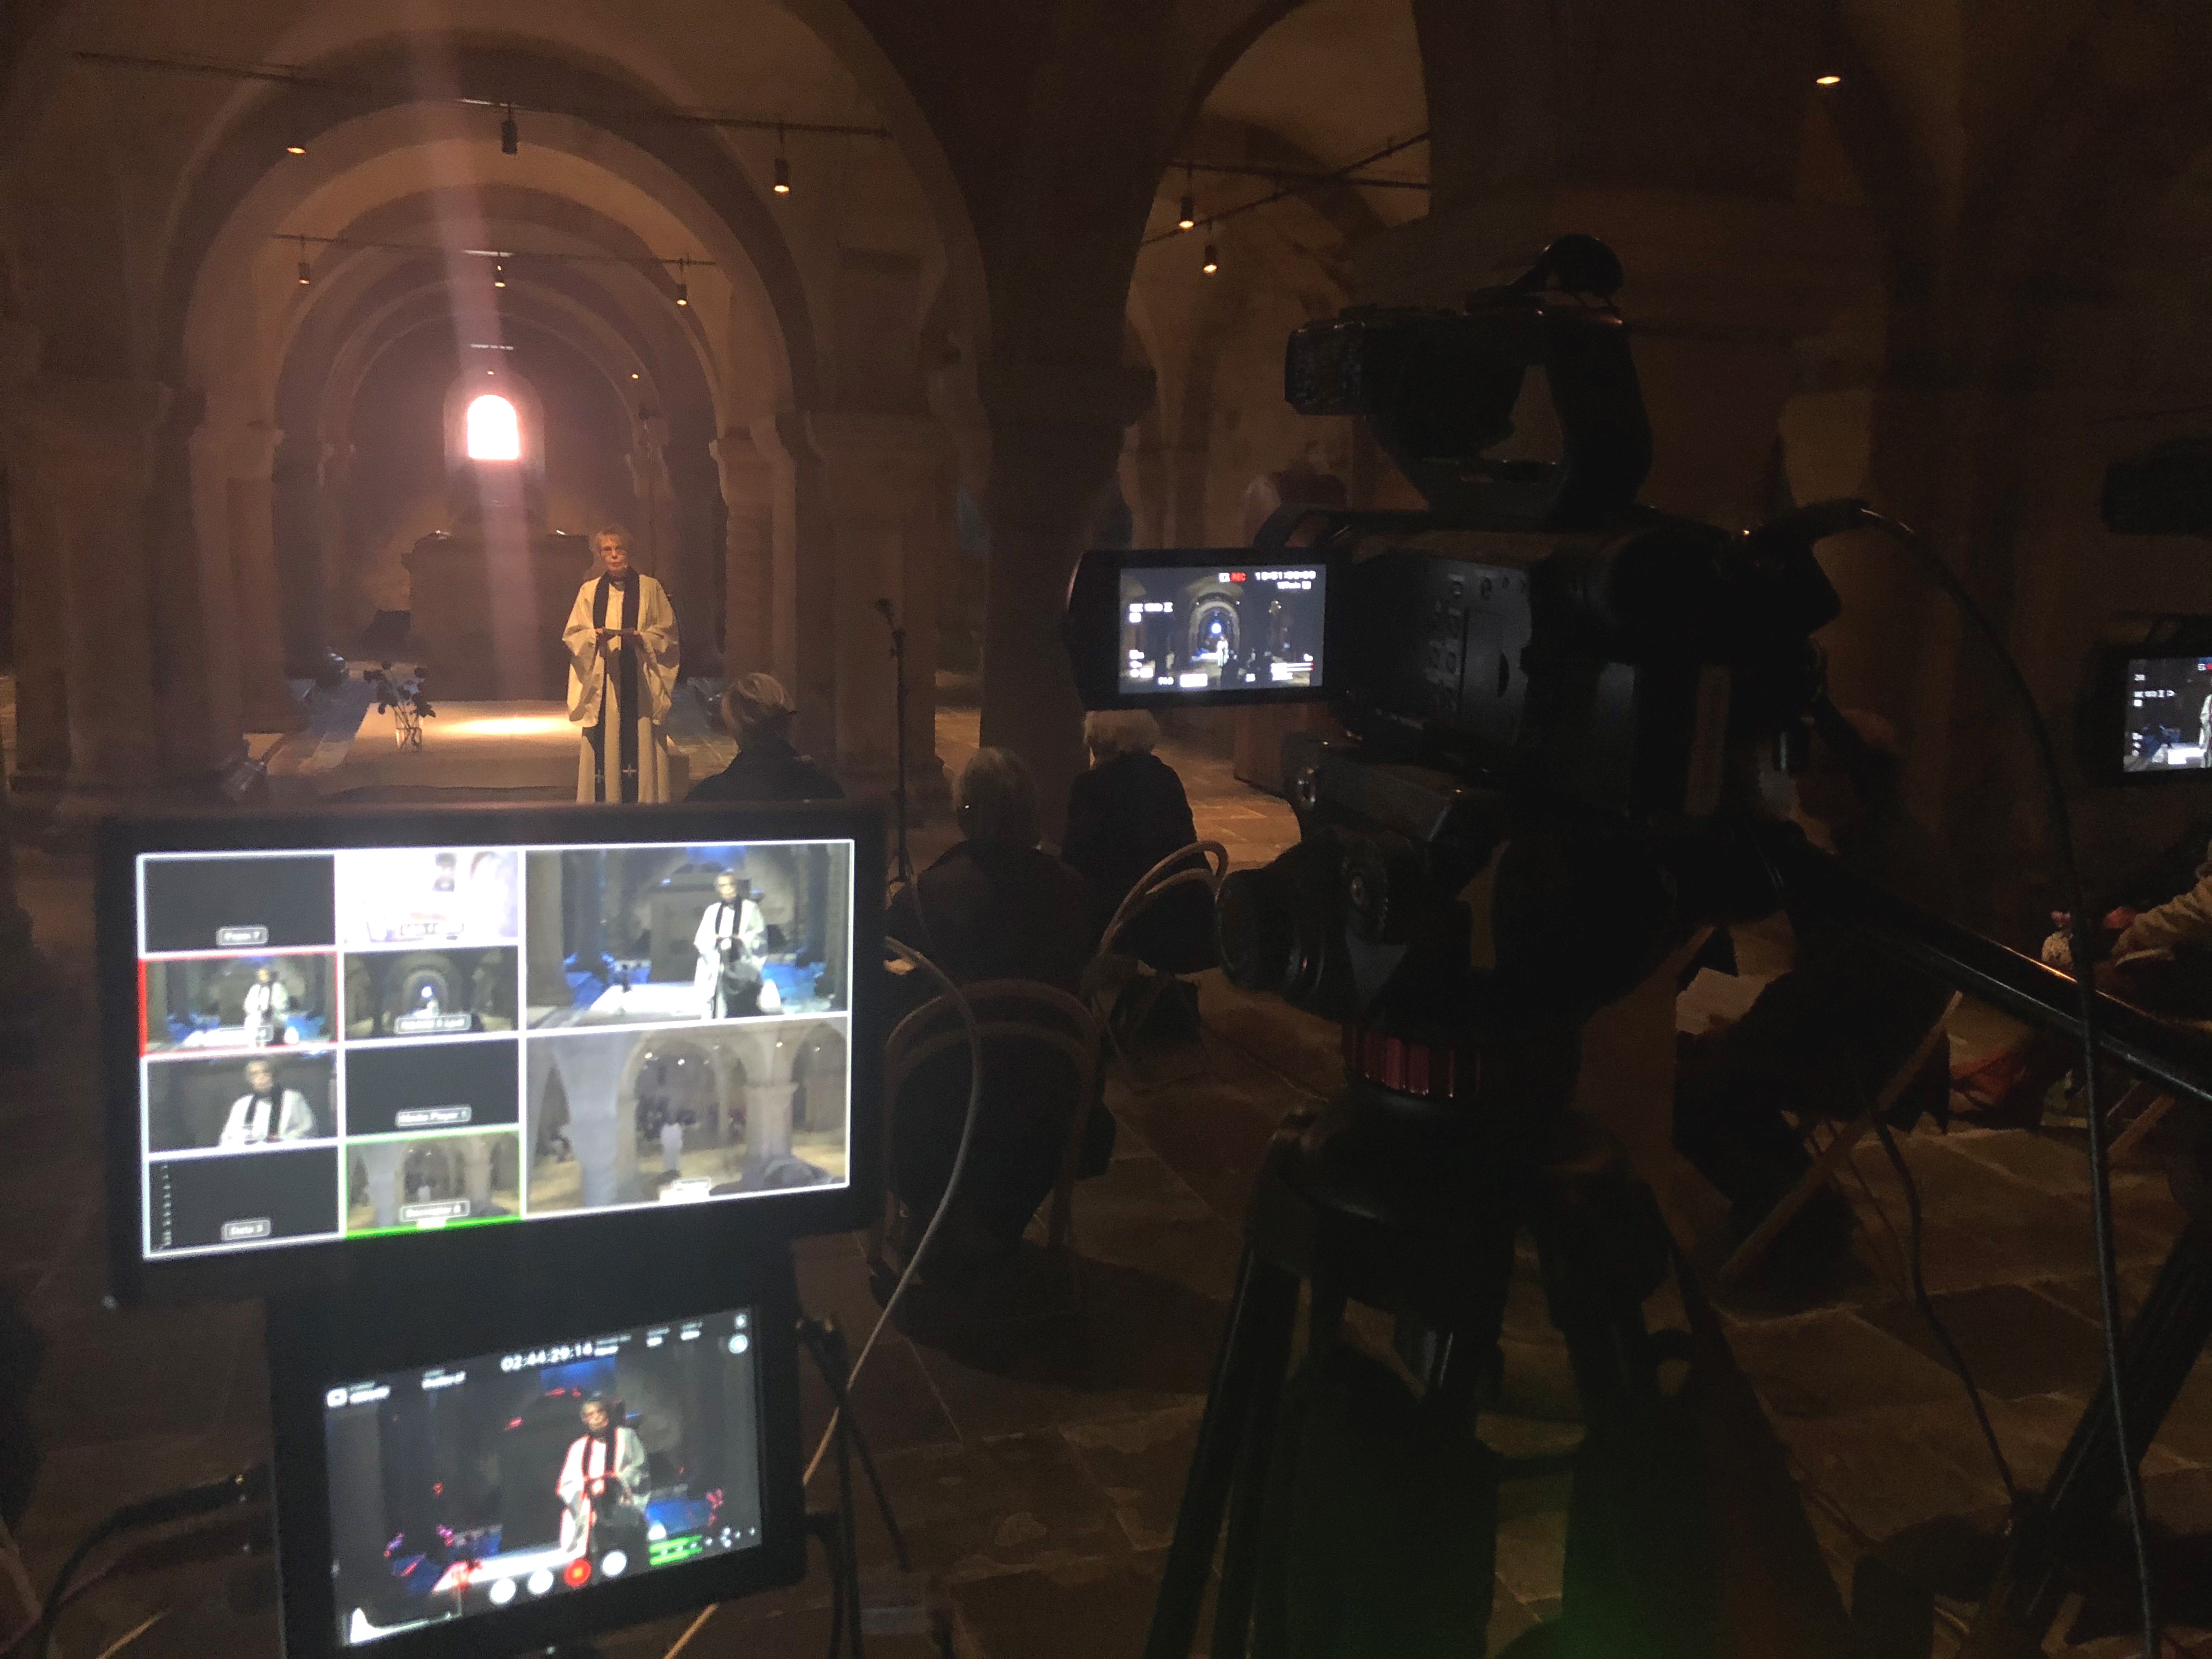 A view from the streaming of a Good Friday service from Lund Cathedral, Sweden. Photo by Andreas Hillergren